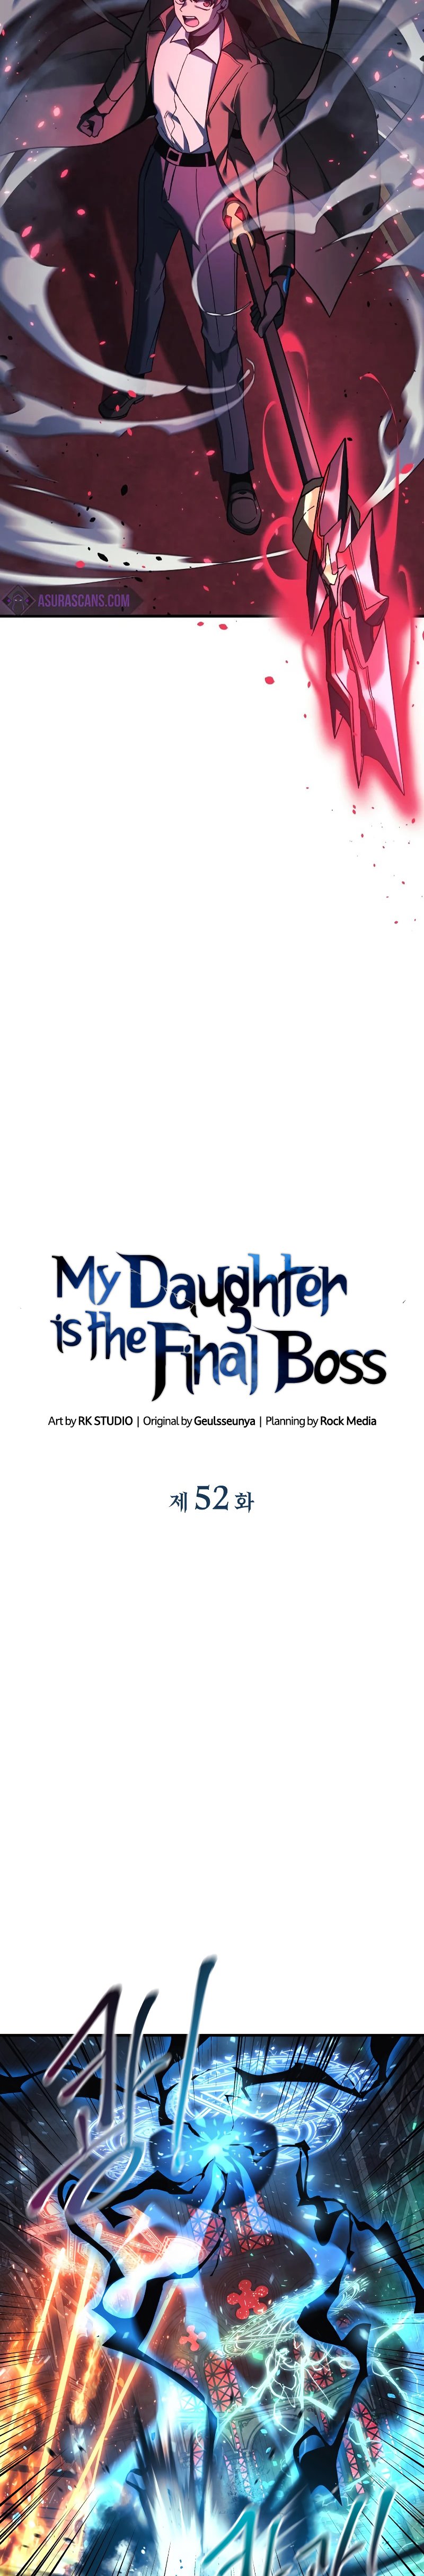 My Daughter is the Final Boss 52 02